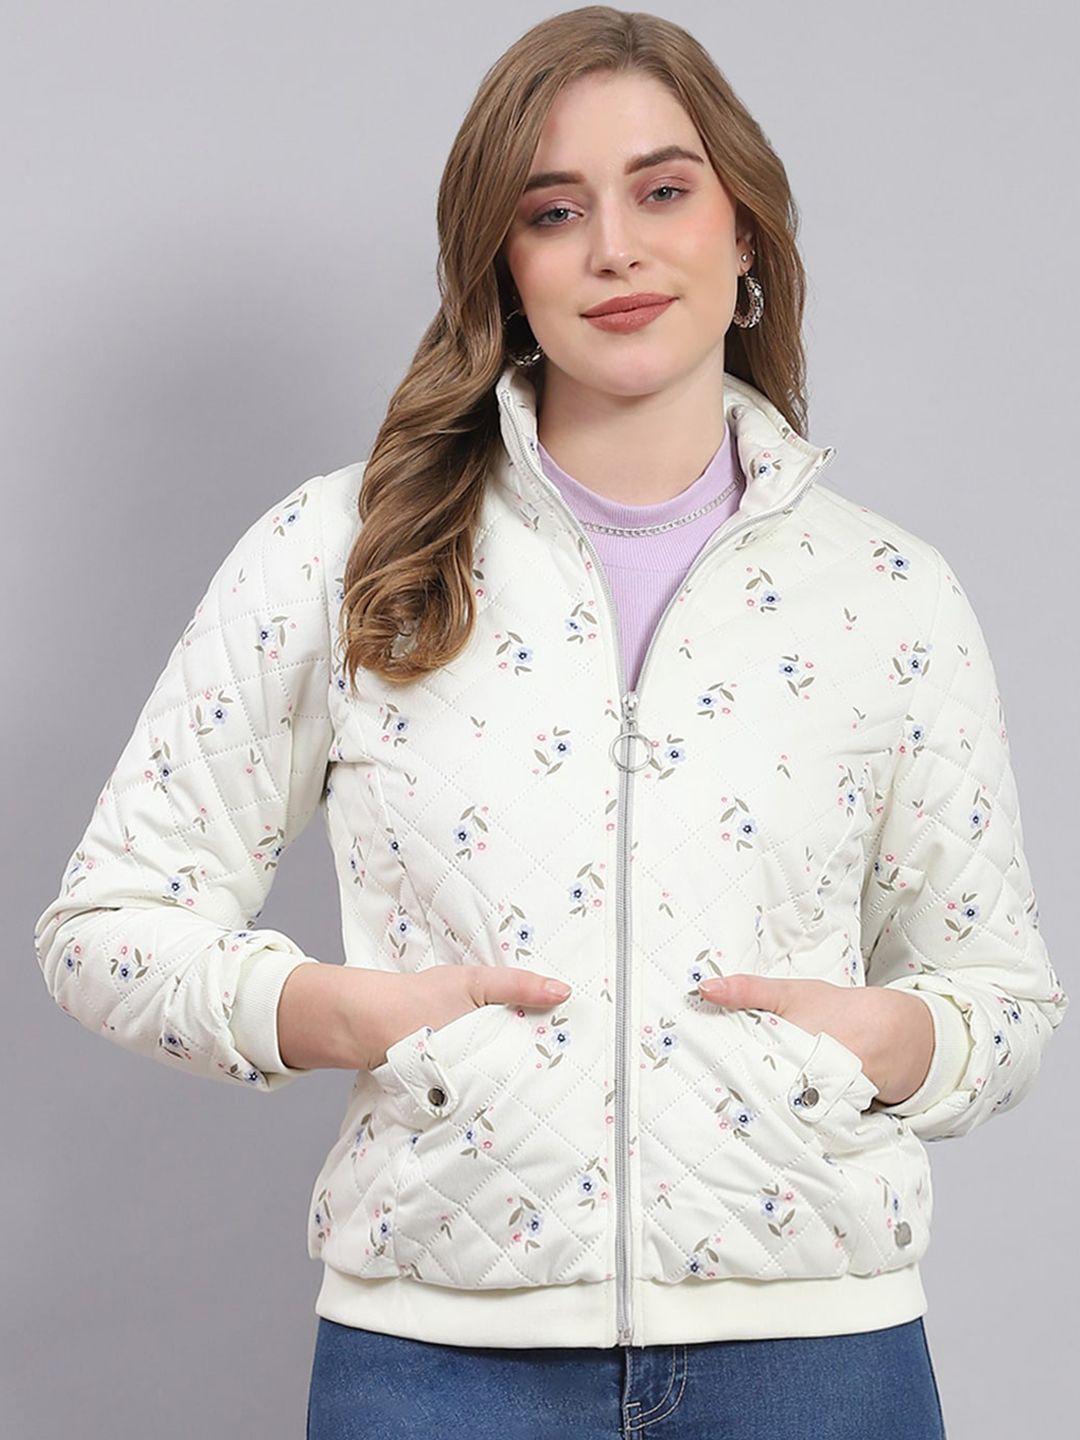 monte carlo floral printed lightweight bomber jacket